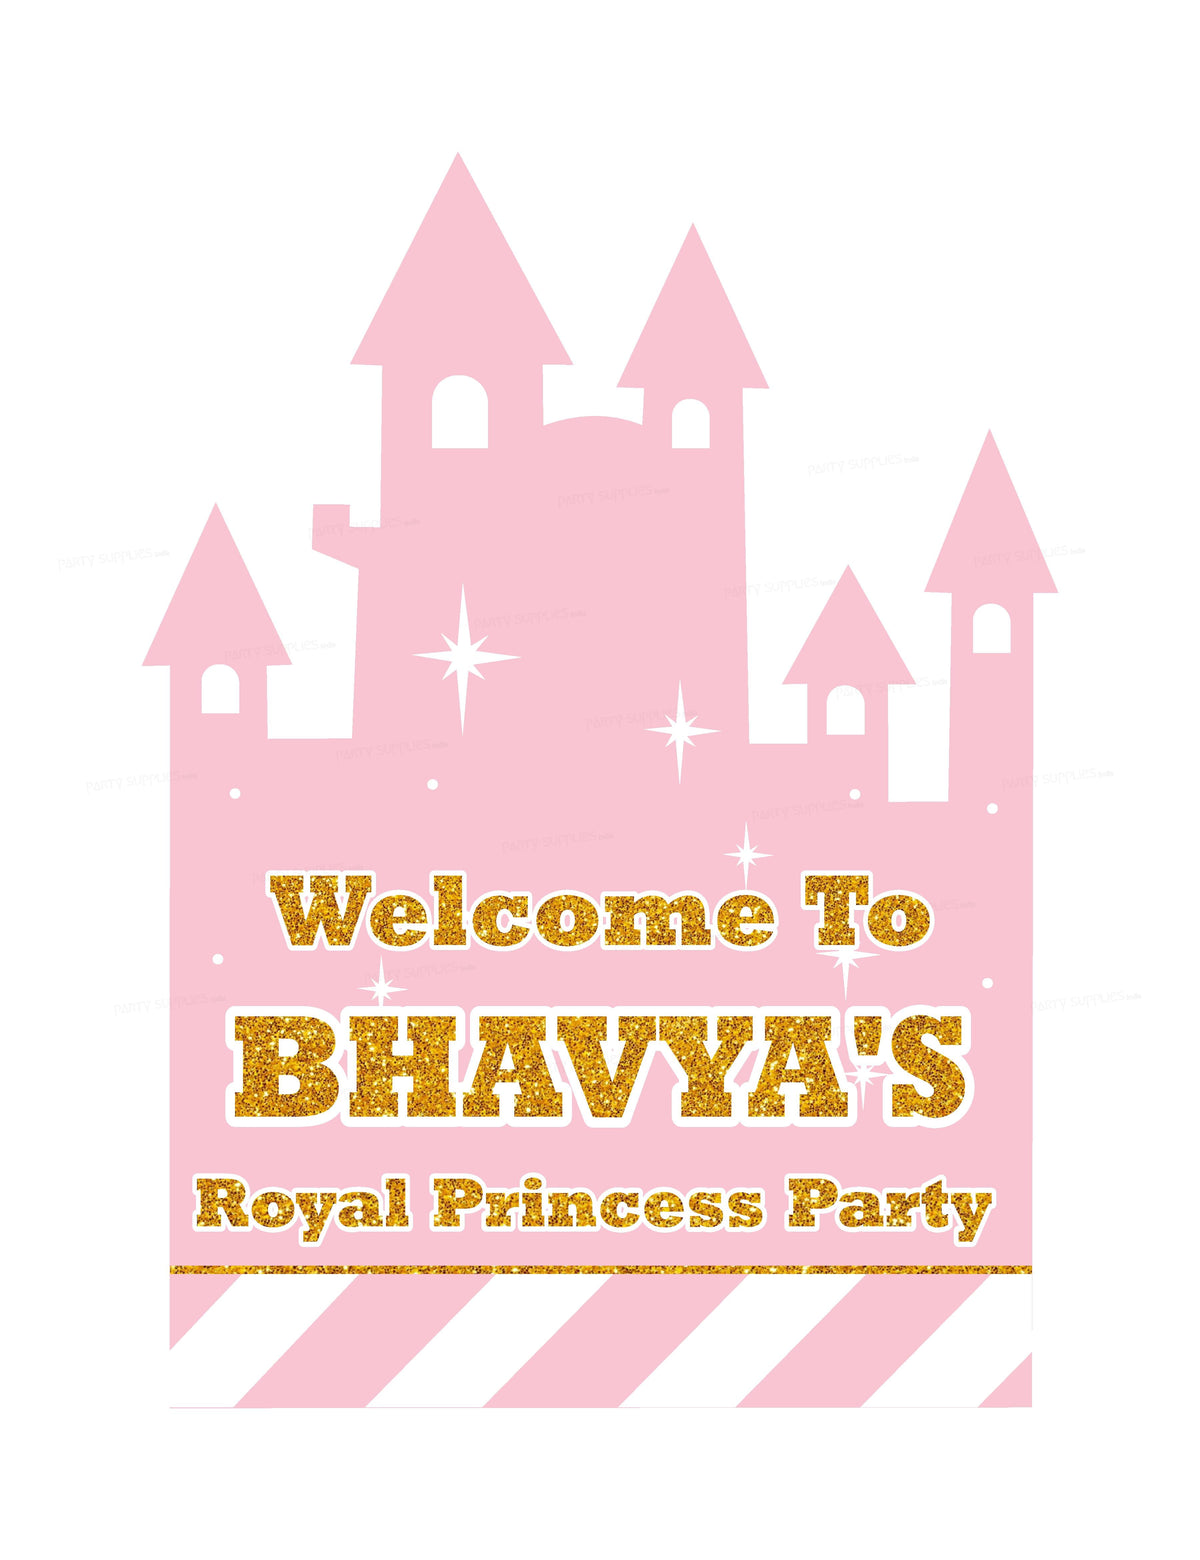 PSI Princess Theme Personalized Welcome Board